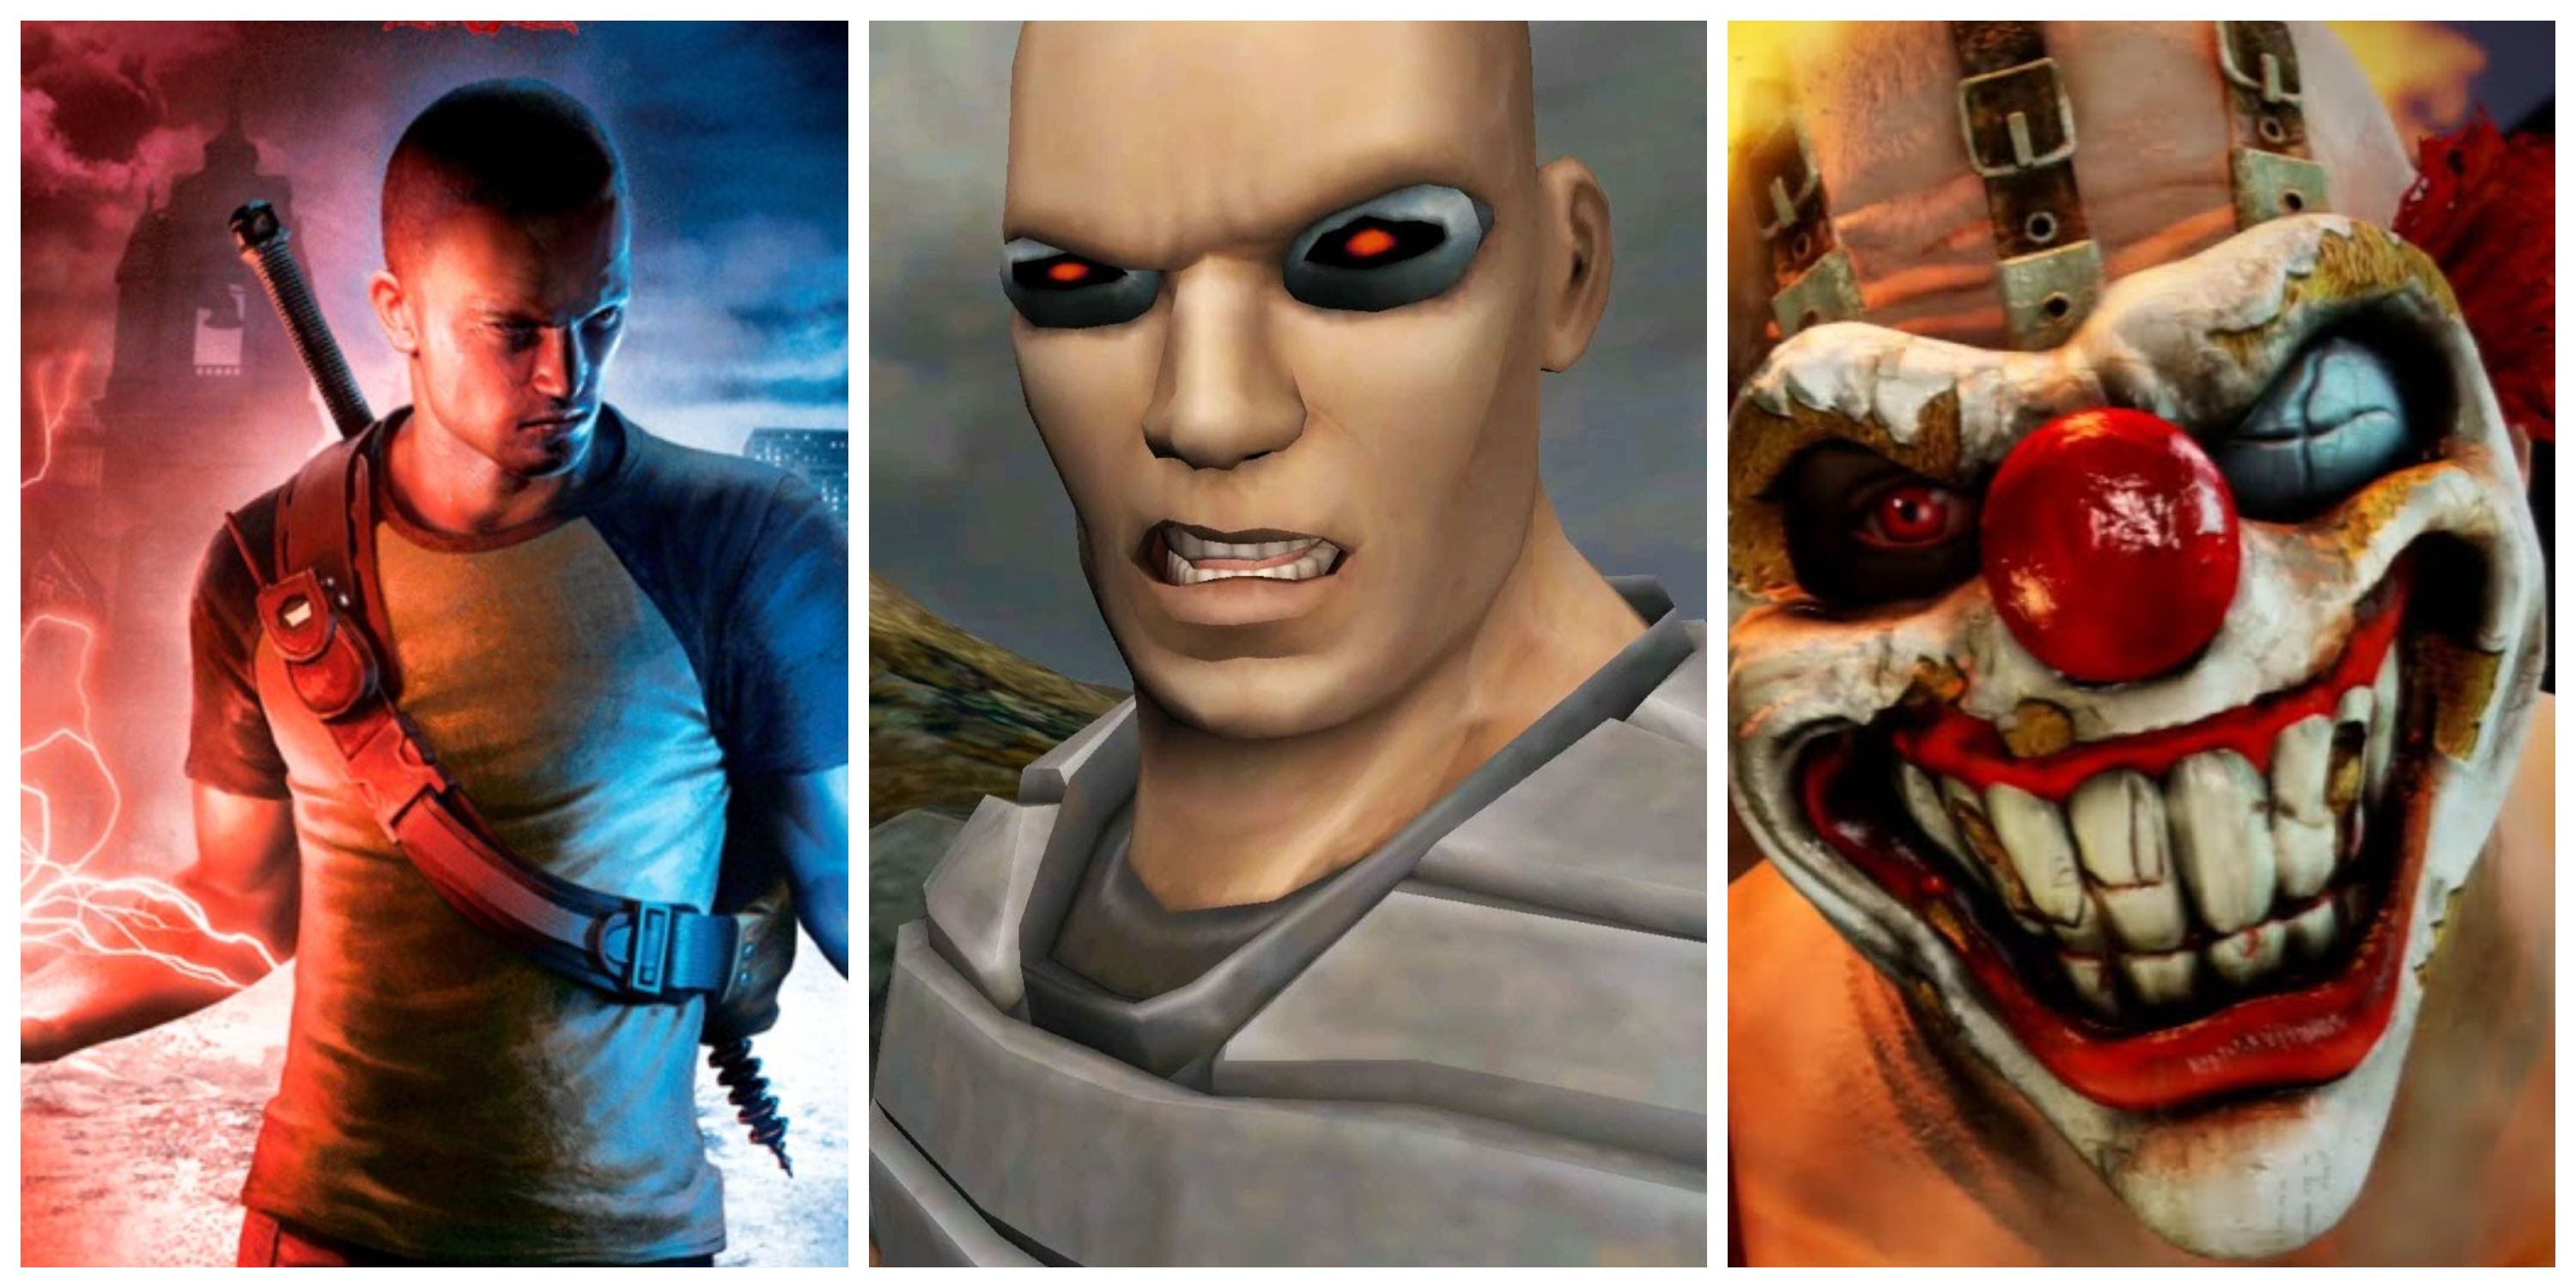 cole from infamous, timesplitters, sweet tooth from twisted metal 